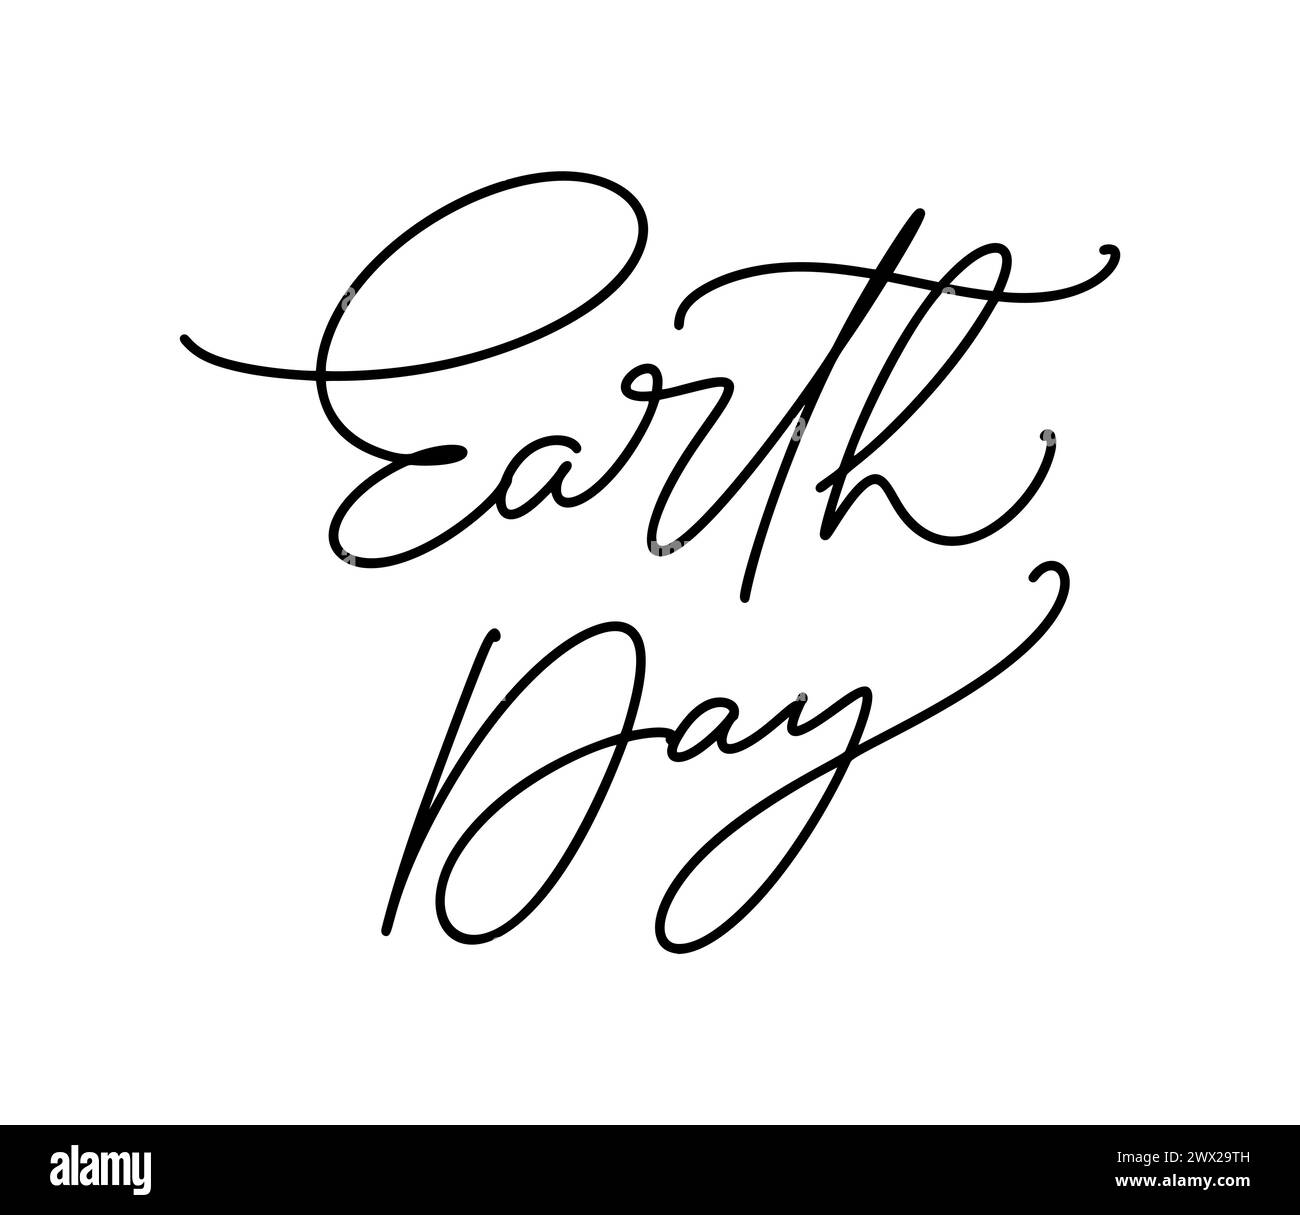 Earth Day handwritten lettering text. Typography calligraphic design for greeting cards and poster template celebration. Vector illustration Stock Vector